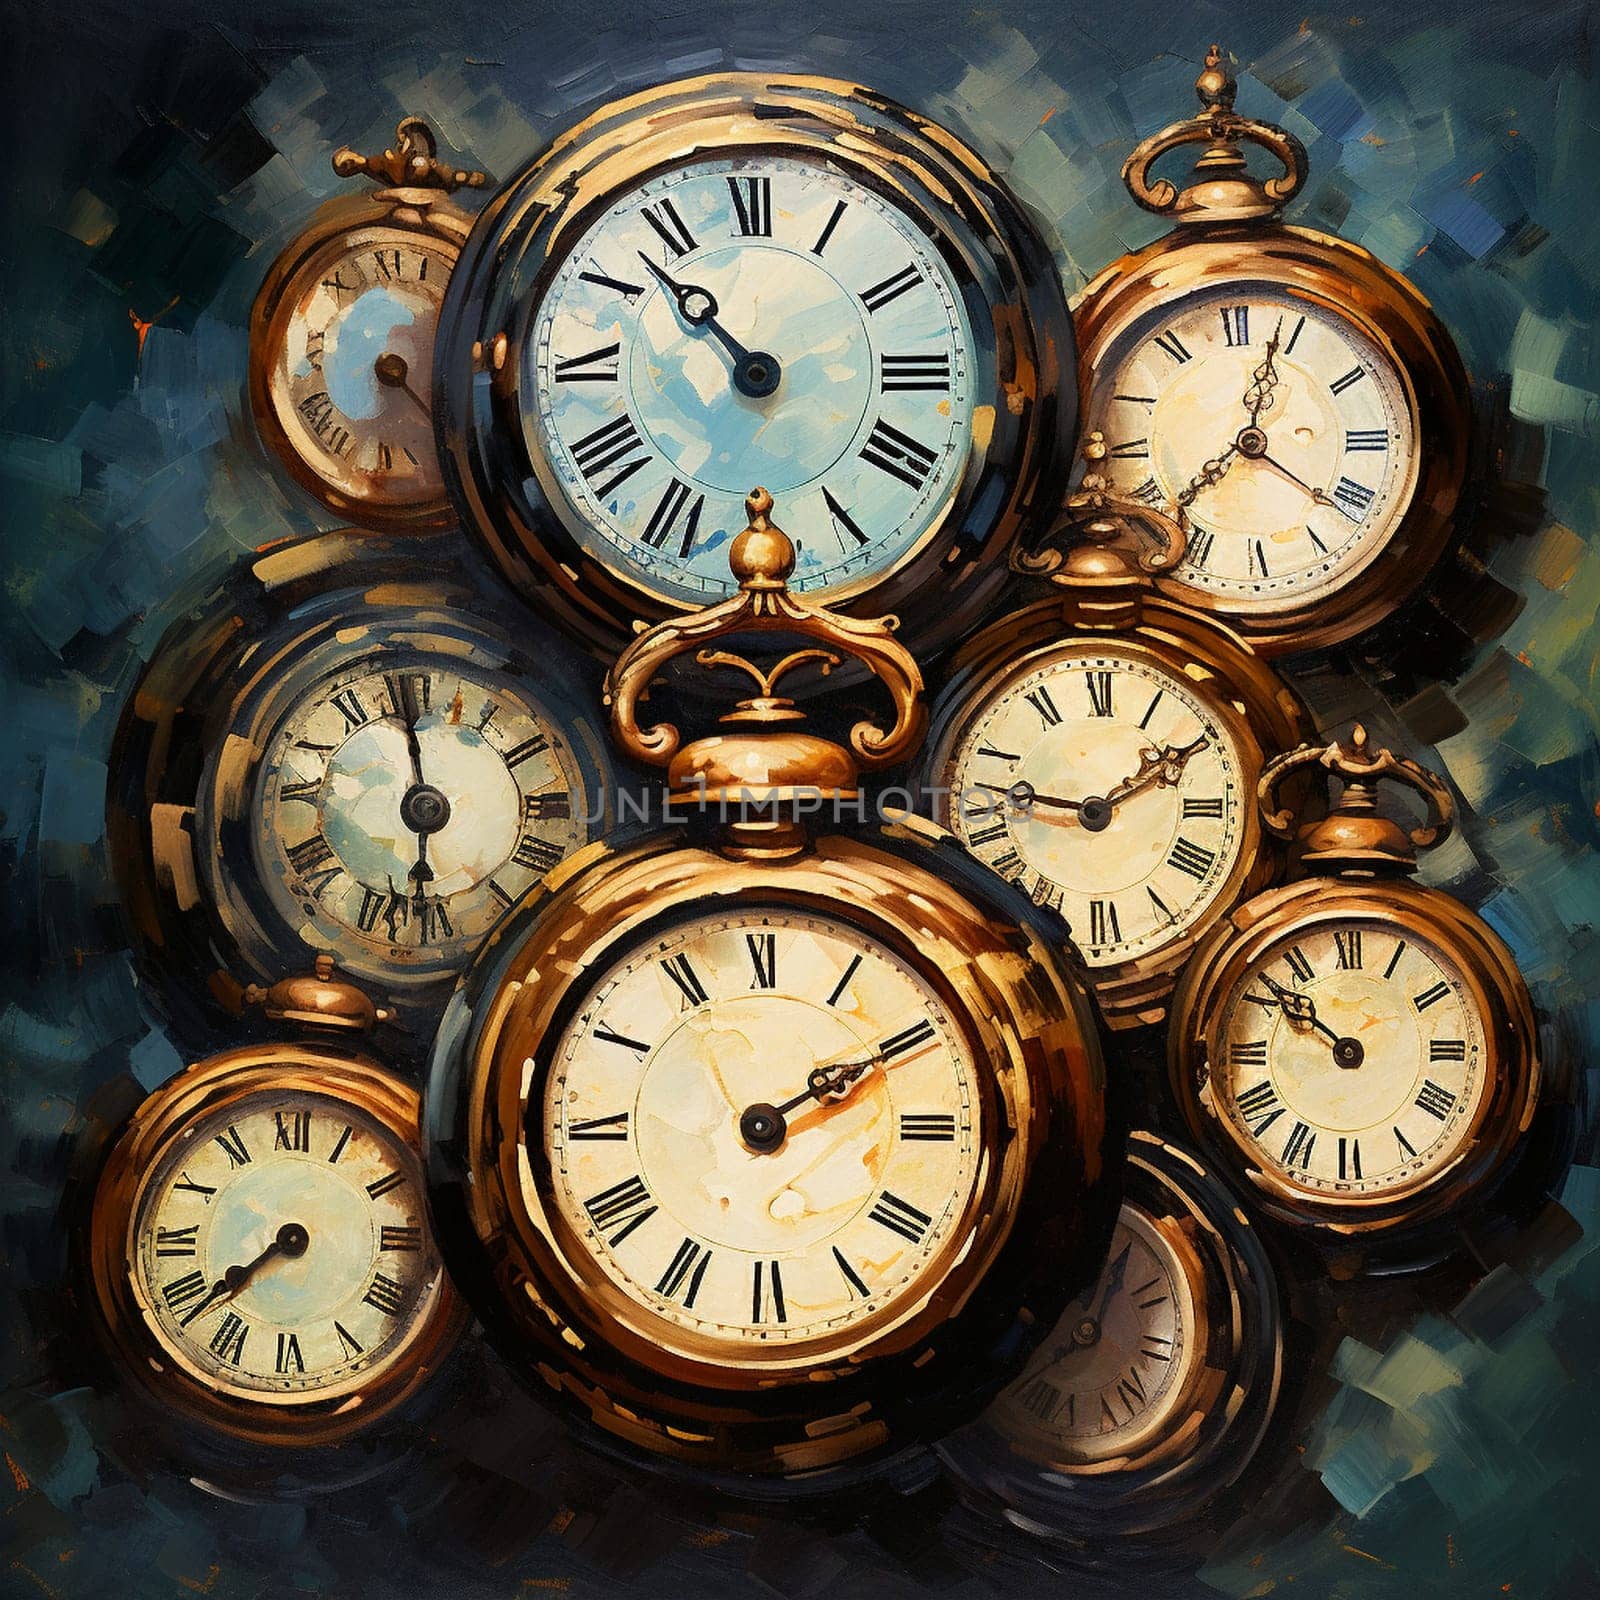 Nostalgic Beauty of Vintage Clocks in Oil Painting Art Style by Sahin